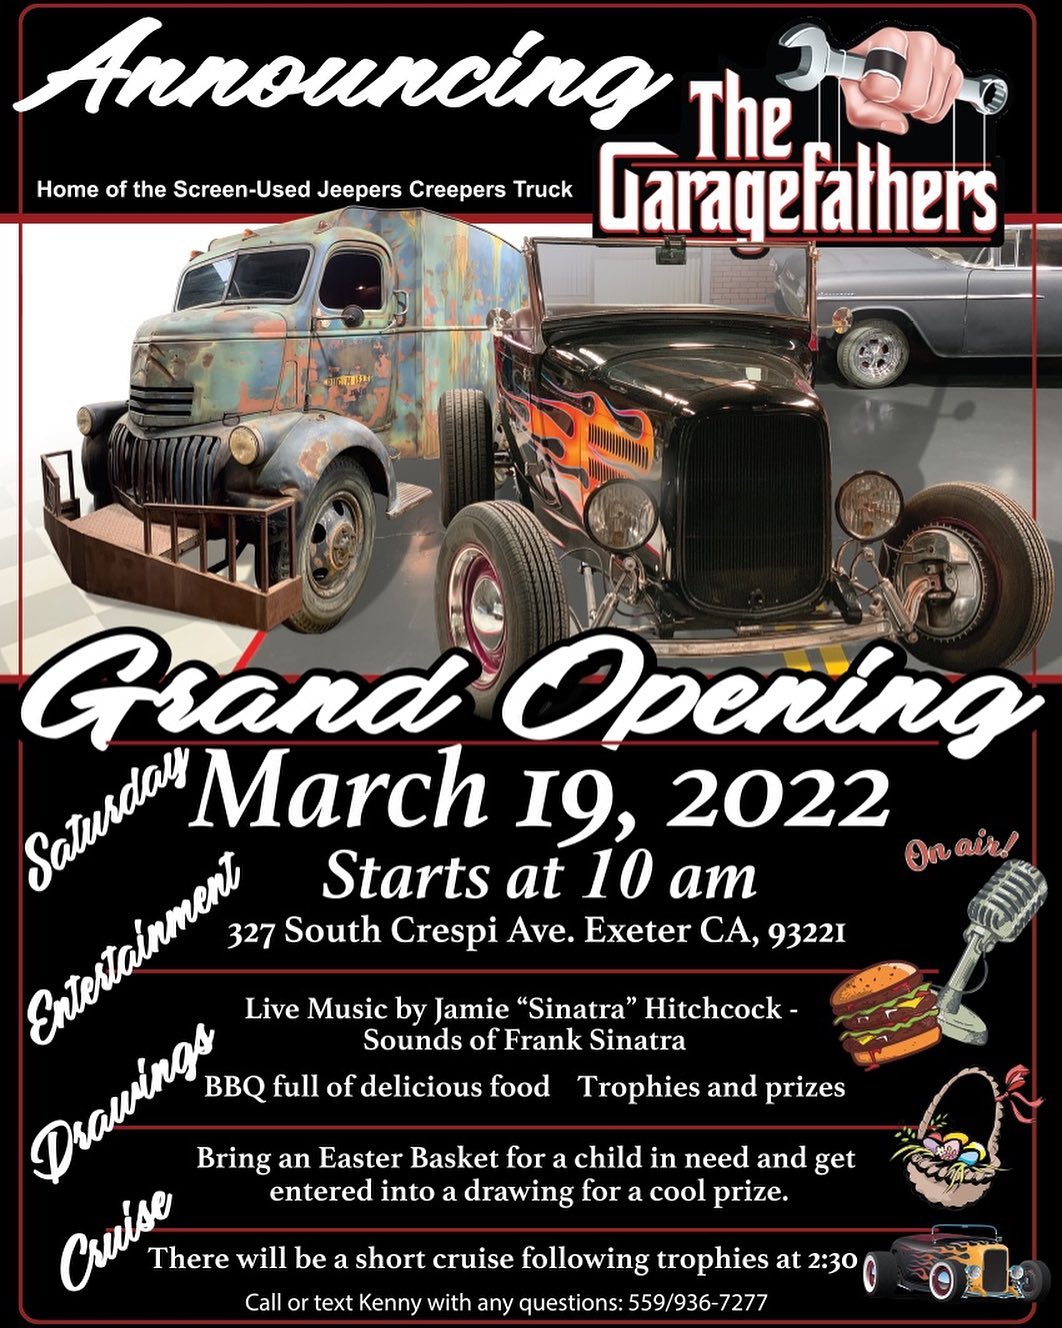 Garage Fathers Grand Opening Car Show